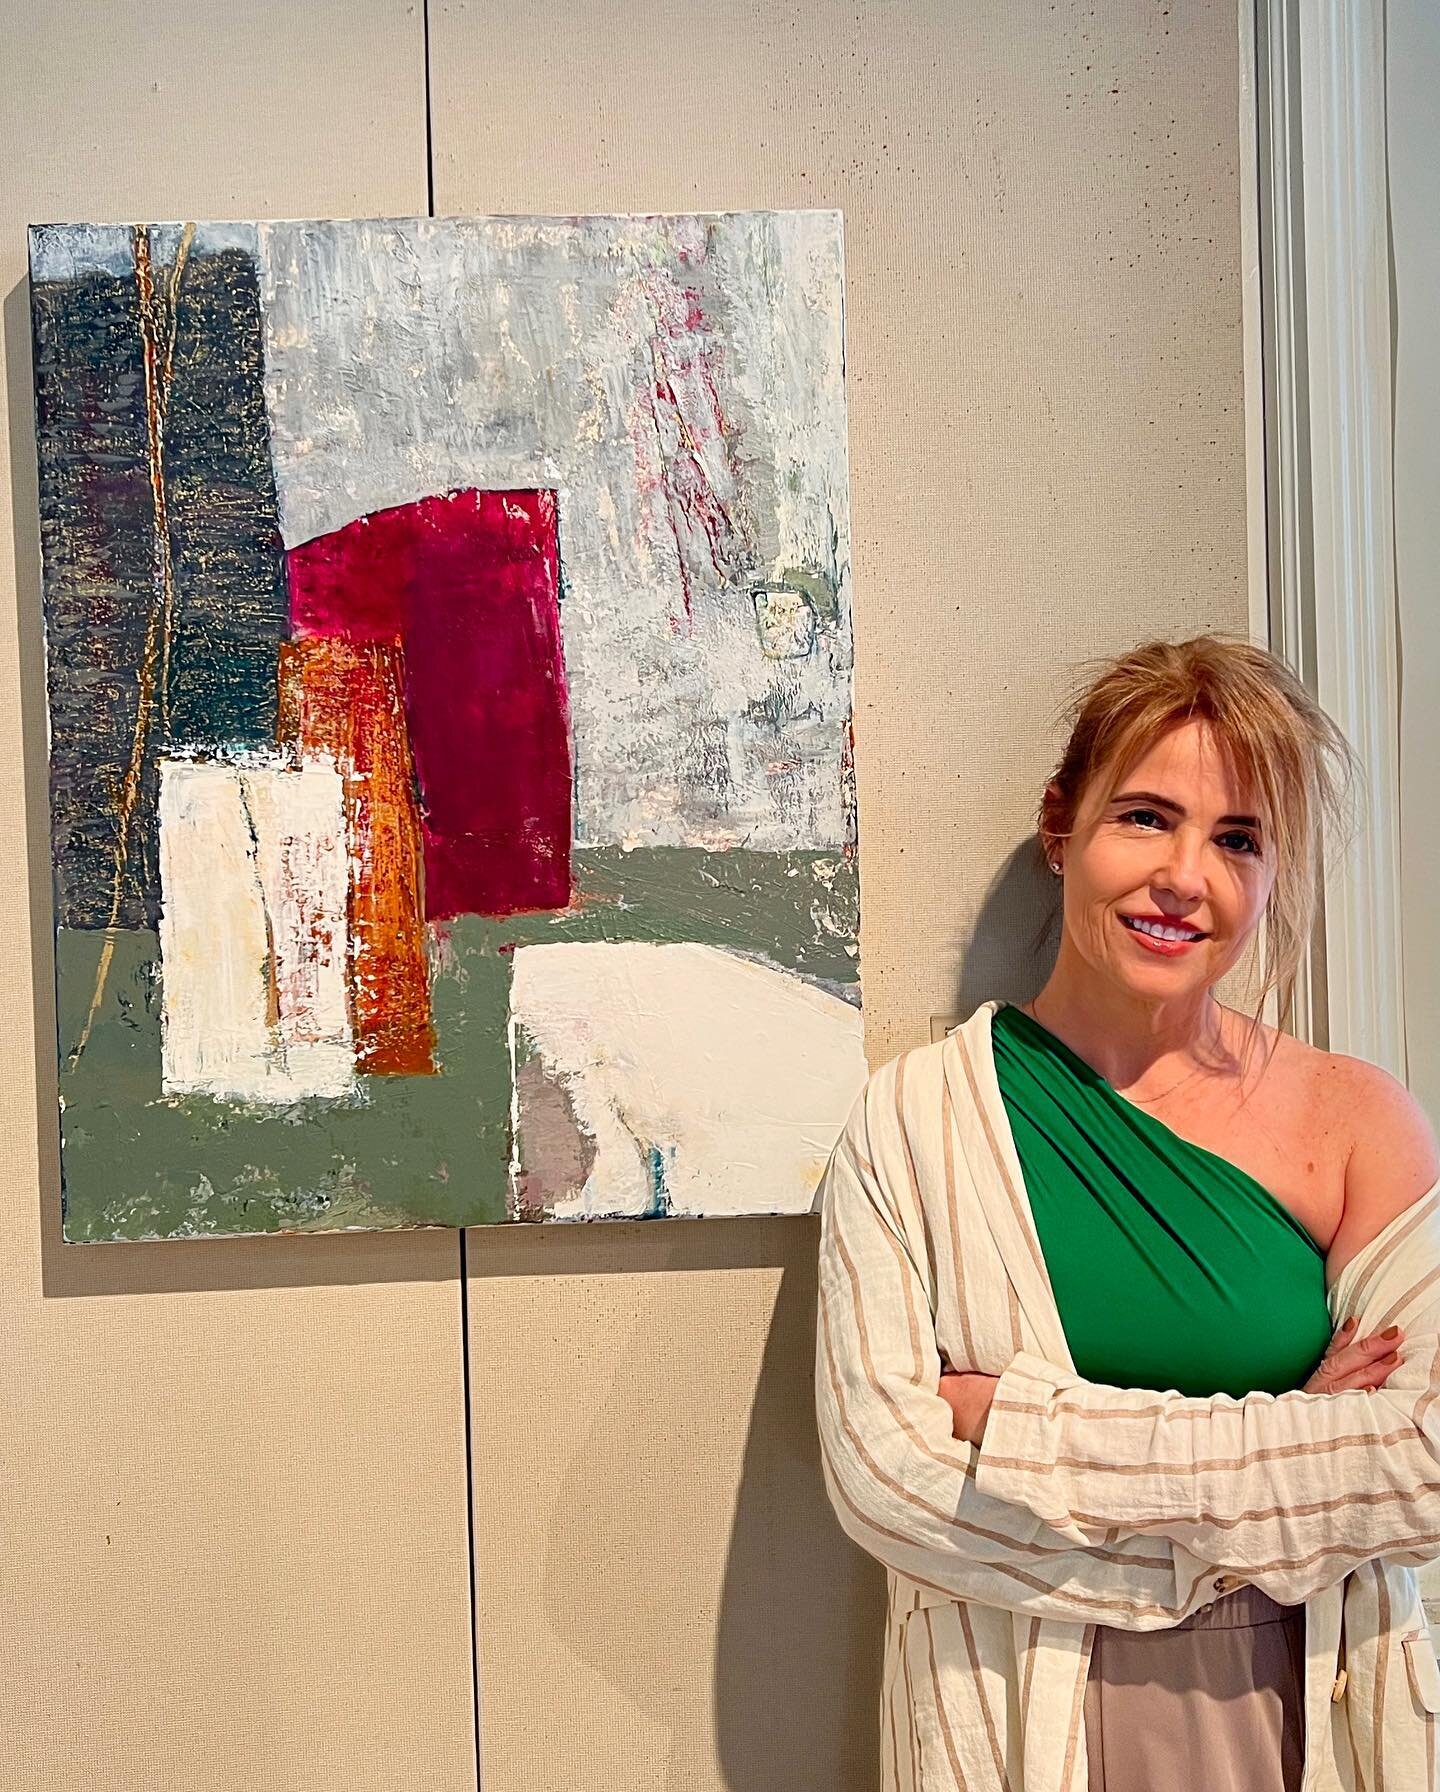 At the opening reception with my painting. Honored to be included in this juried exhibit @greenwichartsociety.

✅ available 

Raspberry 
30 x 24inches
acrylic, oil stick on canvas 

#painting #abstractartist #contemporaryartist #contemporarypainting 